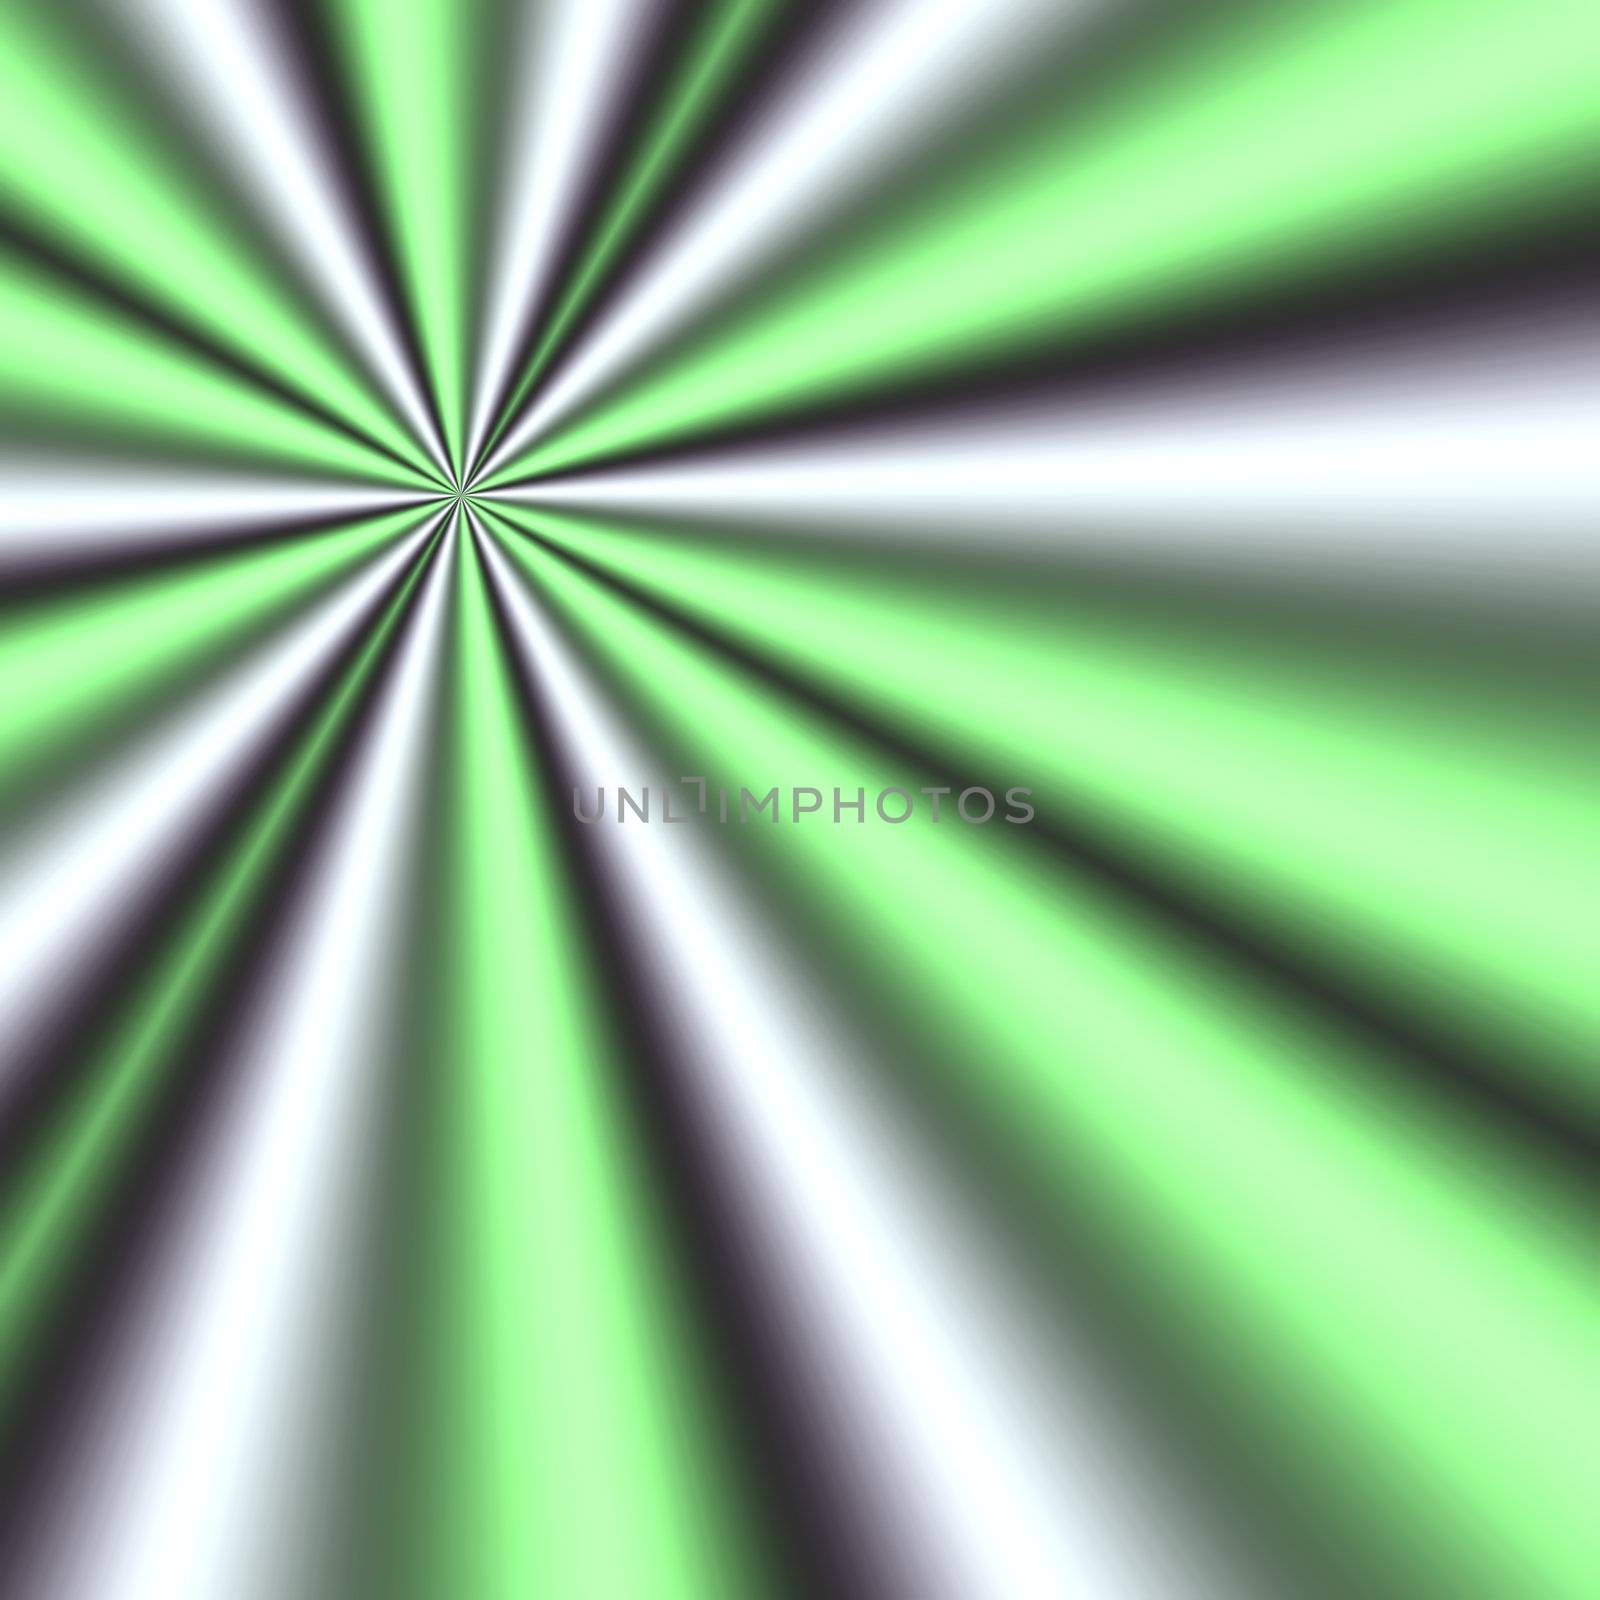 generated green and white rays dissecting space form an abstract background